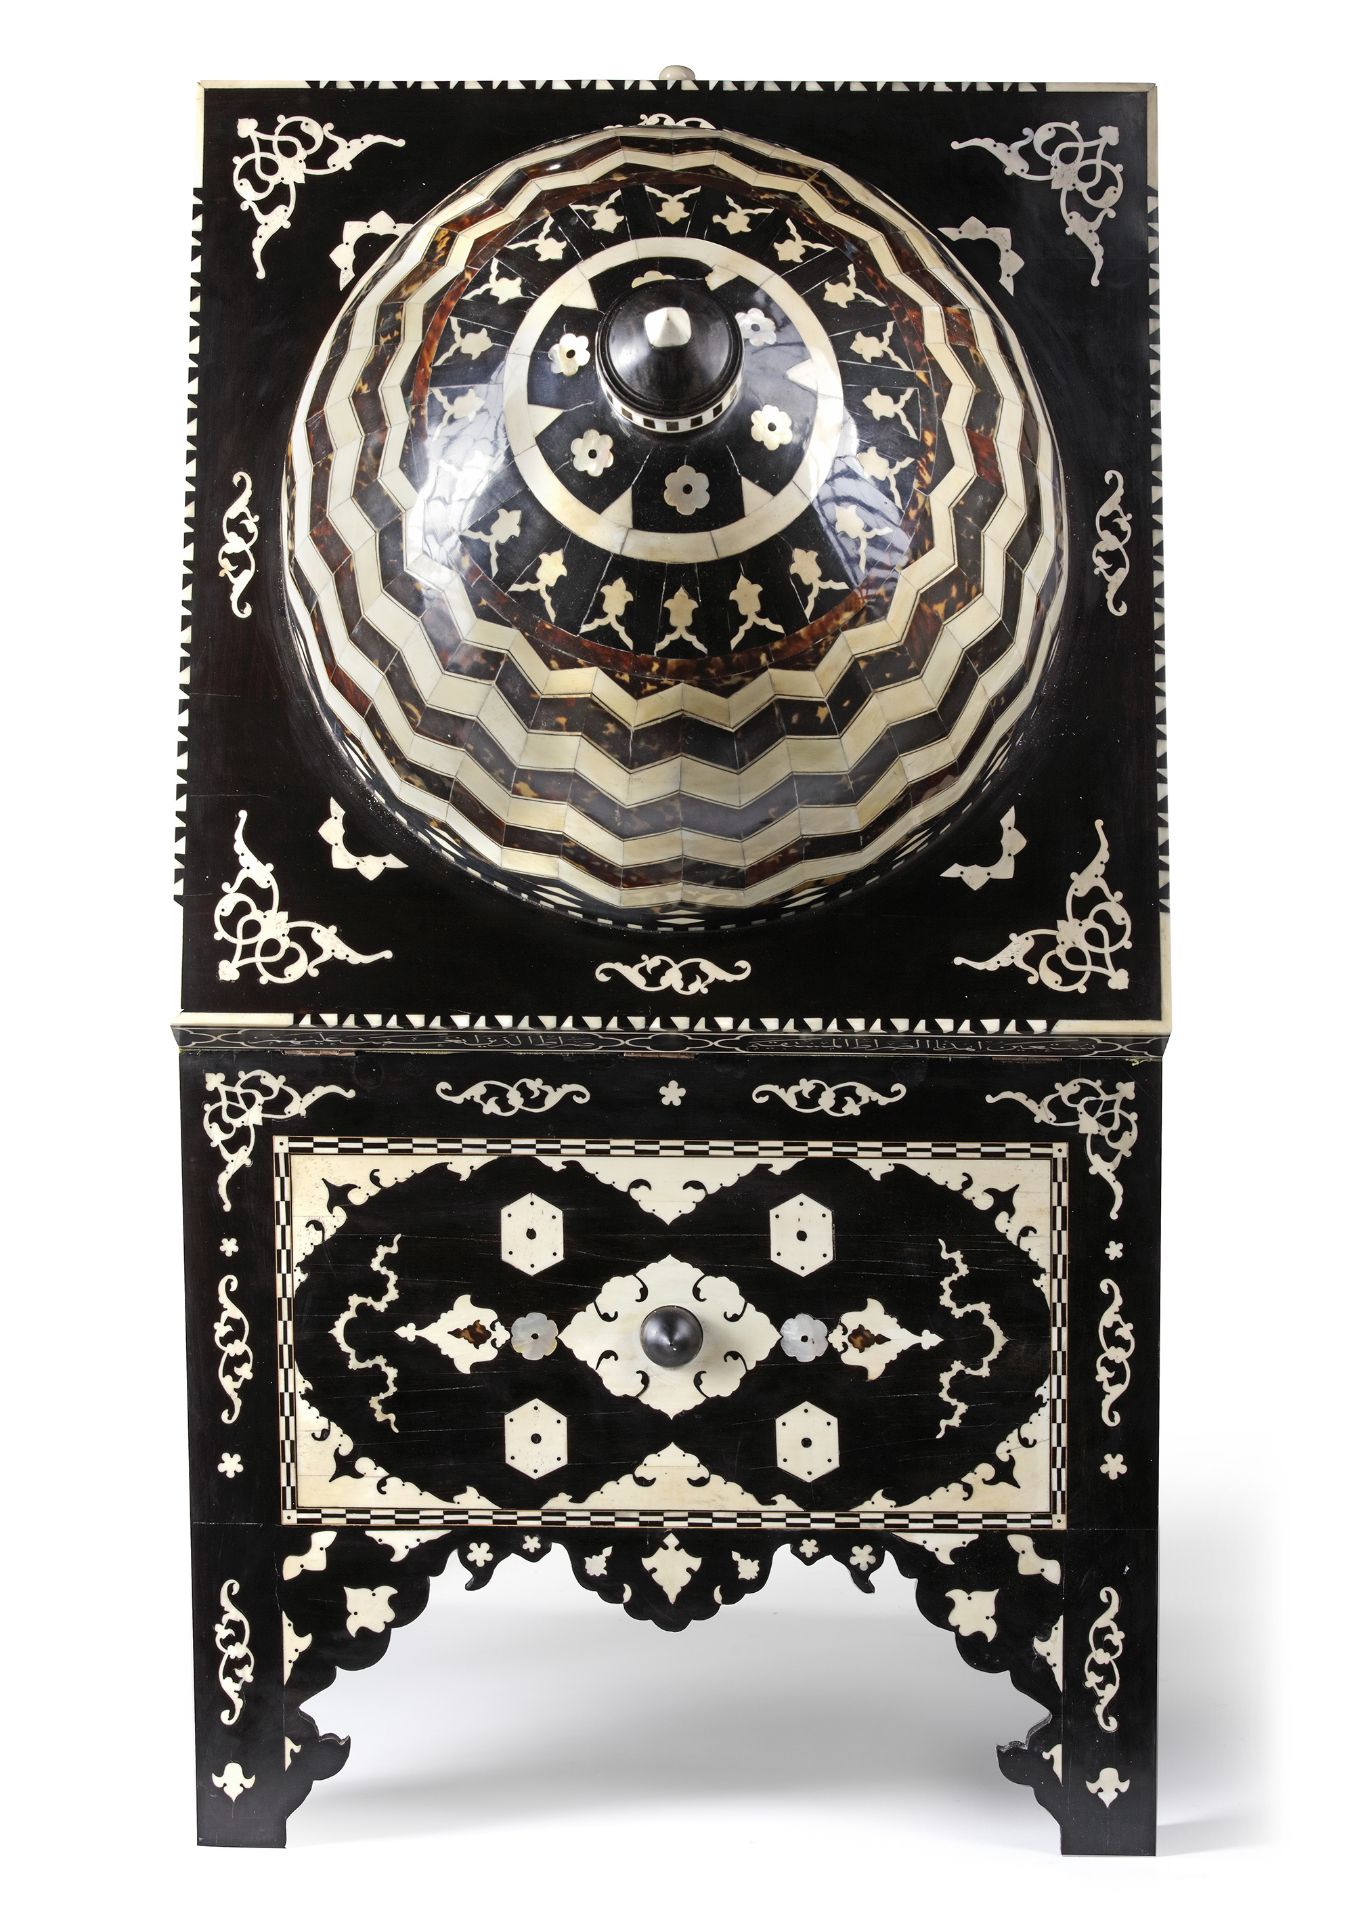 AN EXCEPTIONAL LARGE TORTOISE AND IVORY INLAID WOODEN QURAN CABINET, OTTOMAN, TURKEY, 20TH CENTURY - Image 4 of 4